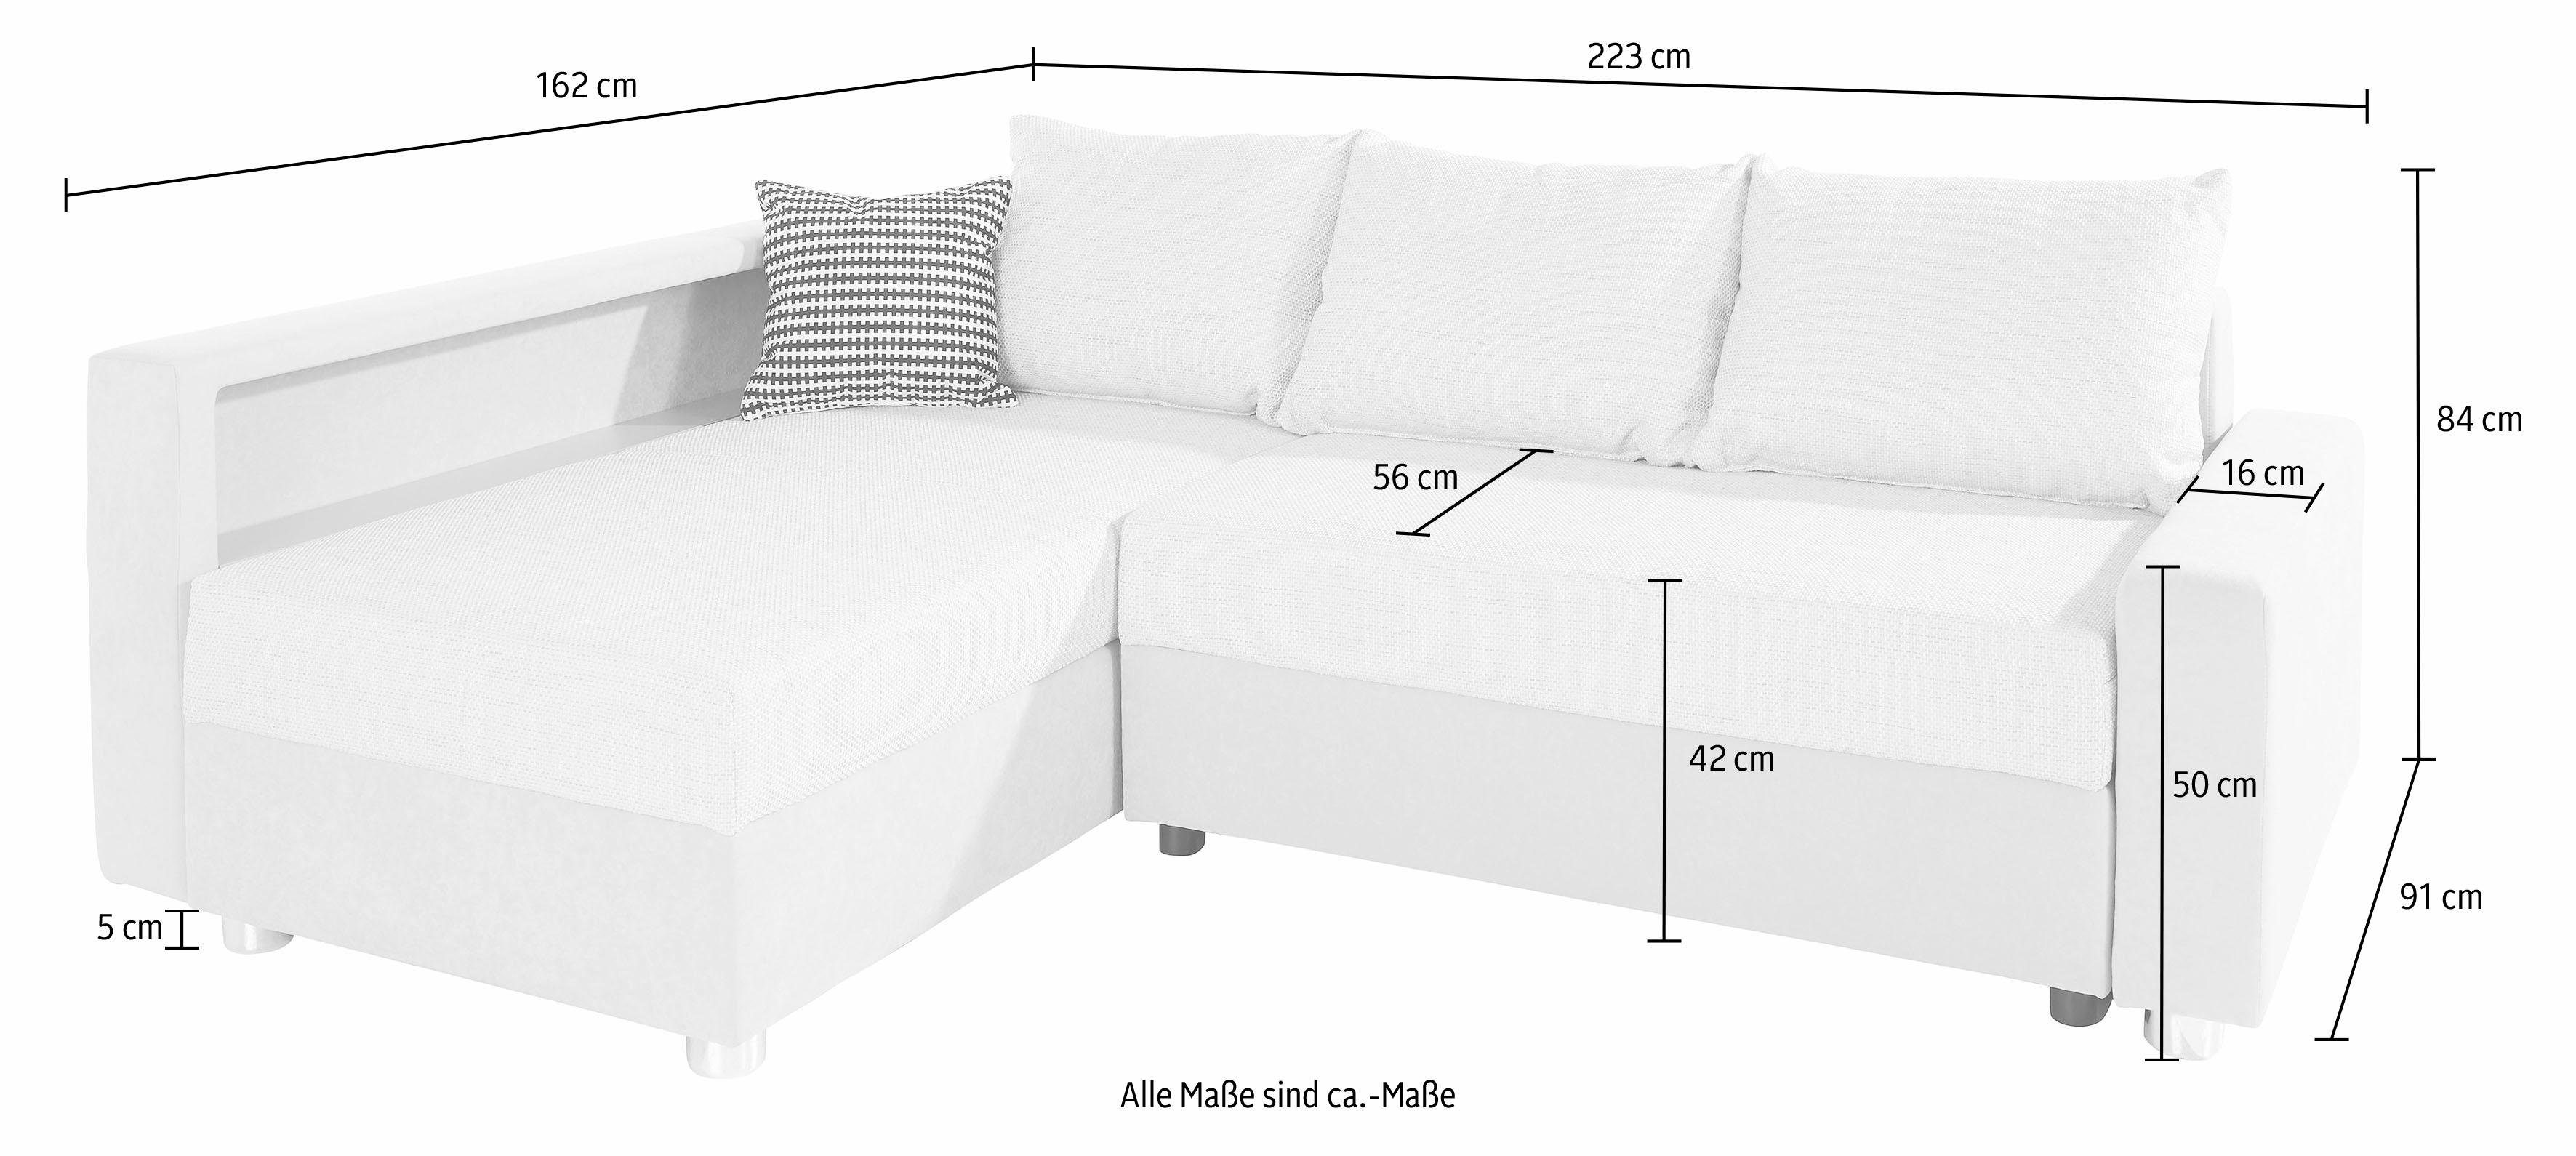 RGB-LED-Beleuchtung COLLECTION Relax, mit Federkern, inklusive wahlweise AB Ecksofa Bettfunktion,